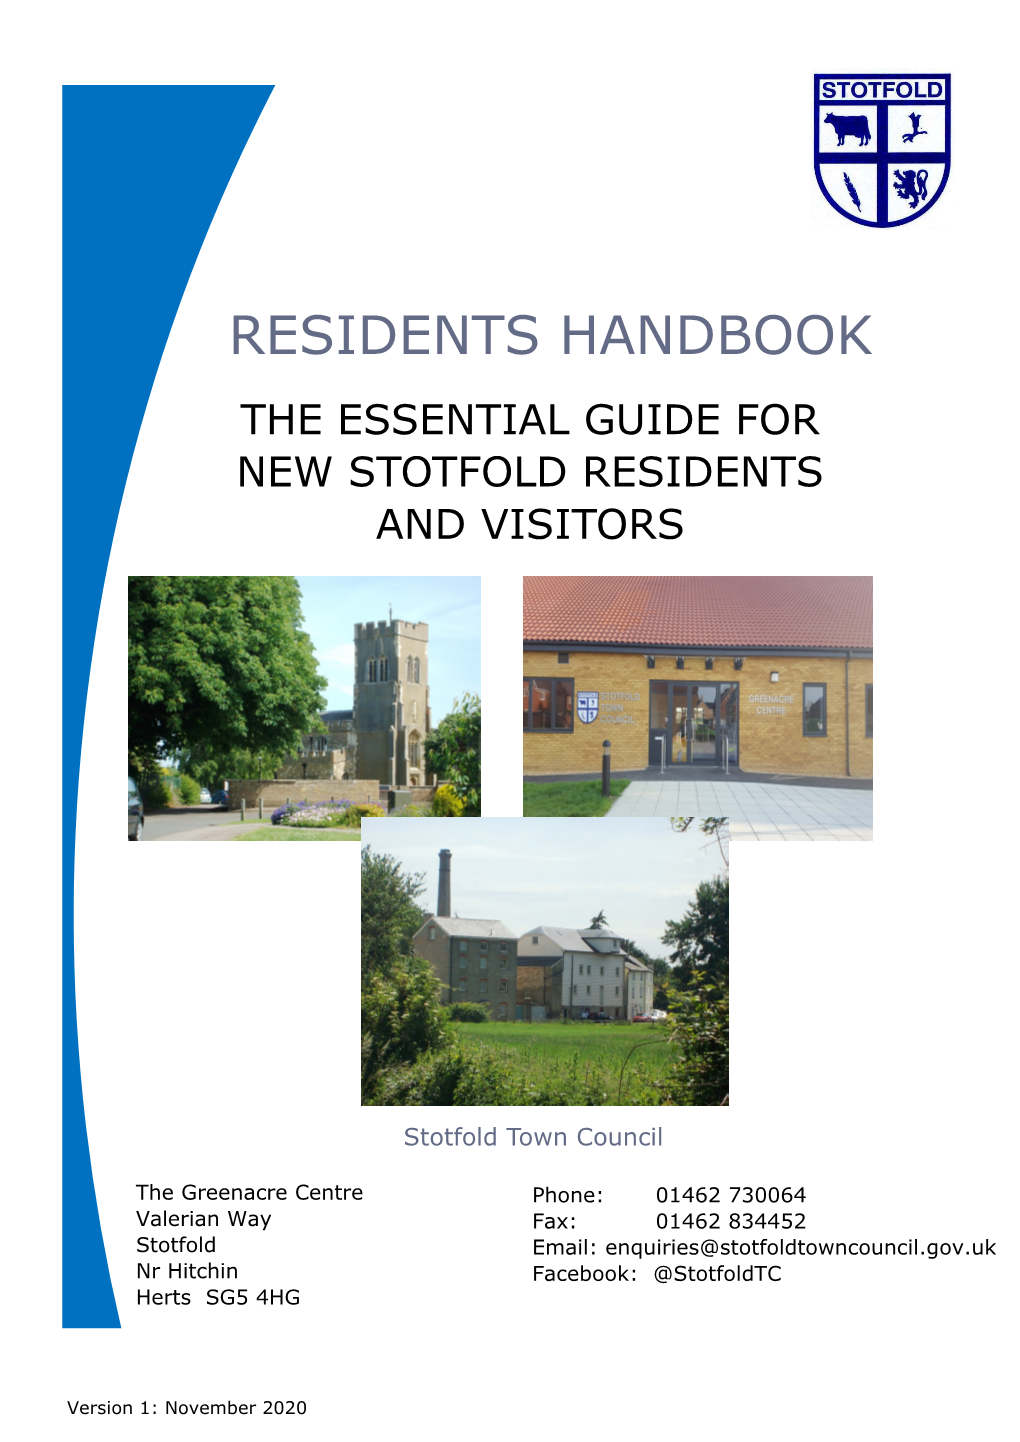 Residents Handbook the Essential Guide for New Stotfold Residents and Visitors